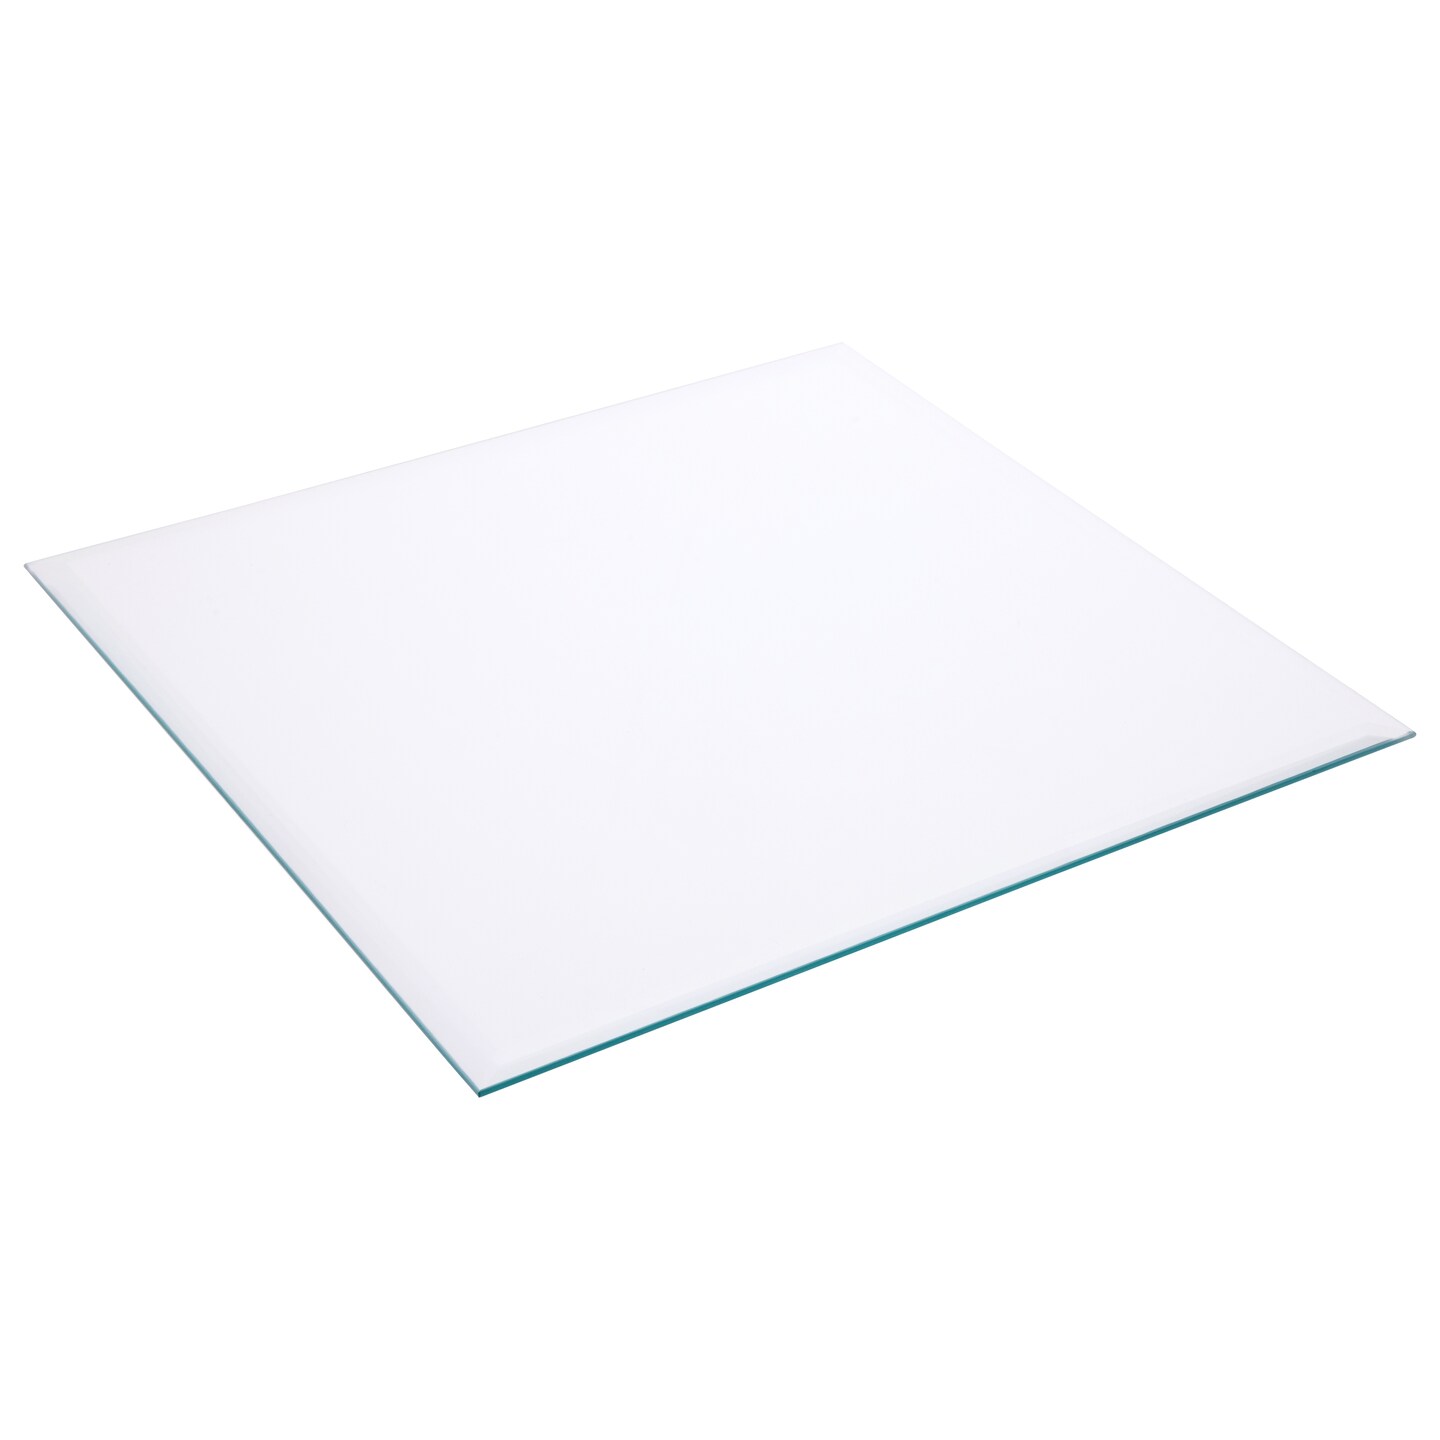 Plymor Square 5mm Beveled Clear Glass, 14 inch x 14 inch